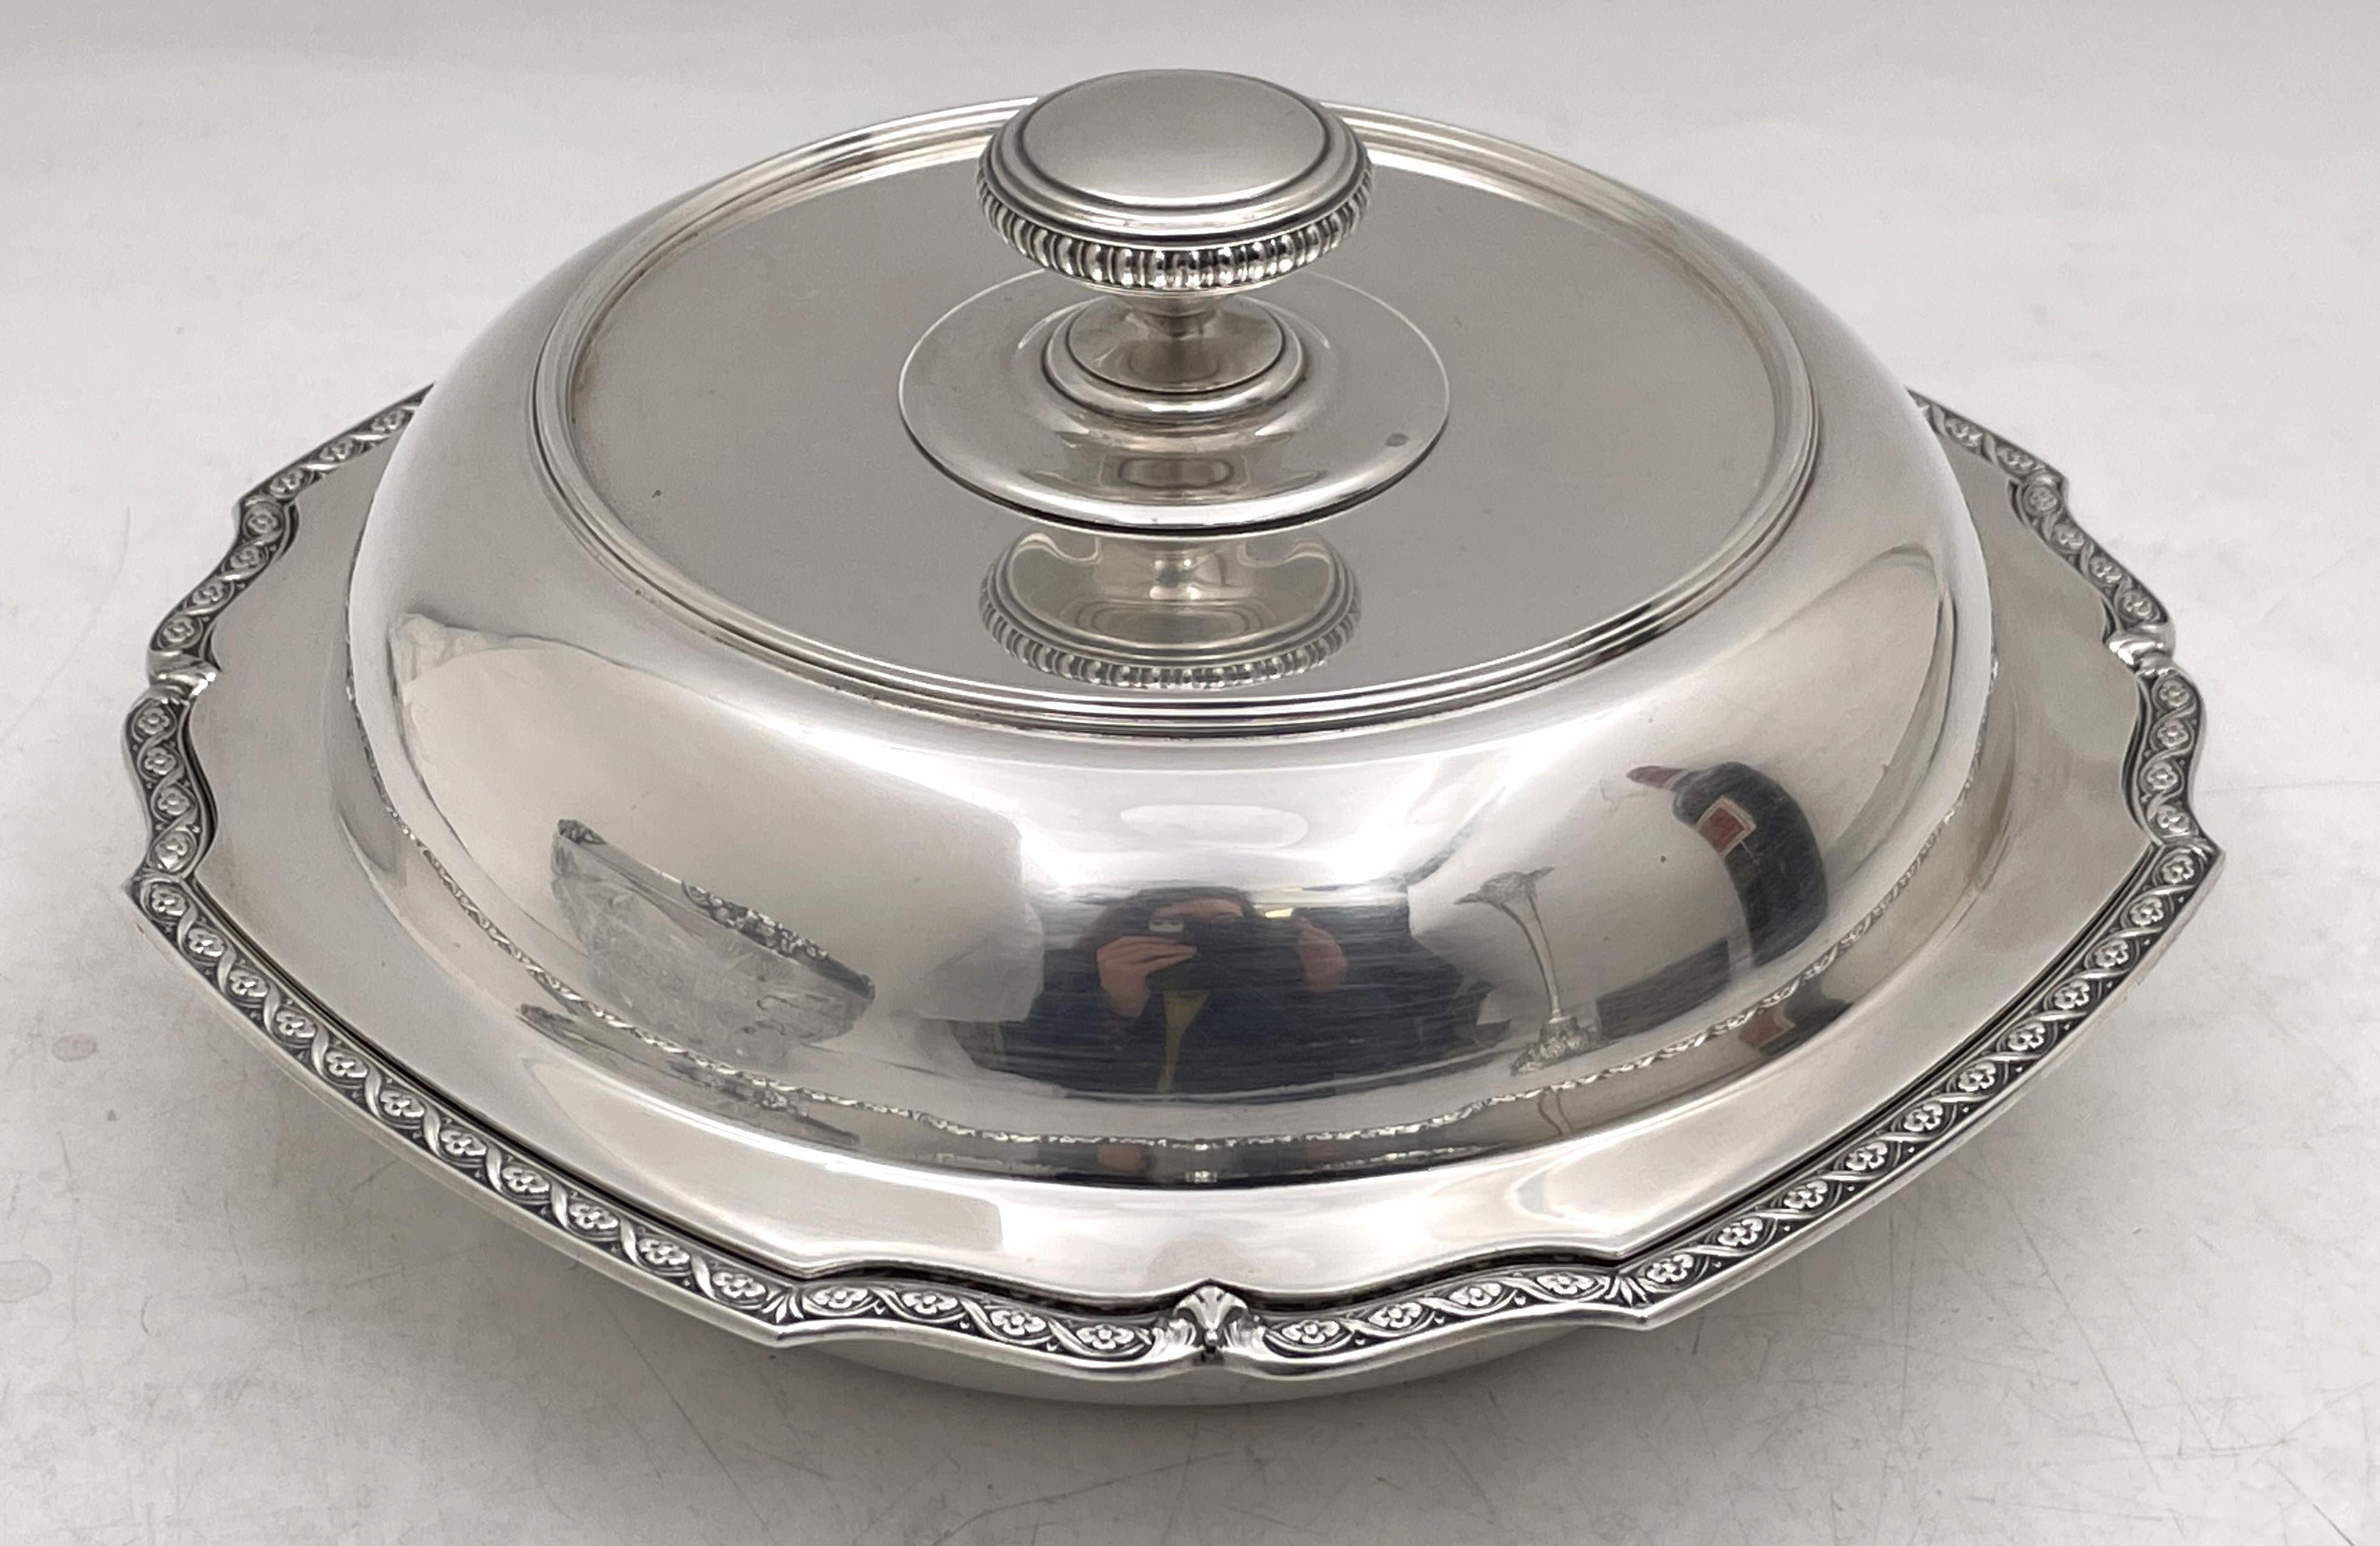 Tiffany & Co. sterling silver covered vegetable dish in pattern number 20682 from 1926 in Art Deco style with an elegant, geometric design and adorned with floral motifs around the rim. It measures 9 1/3'' in diameter by 5'' in height, weighs 37.5